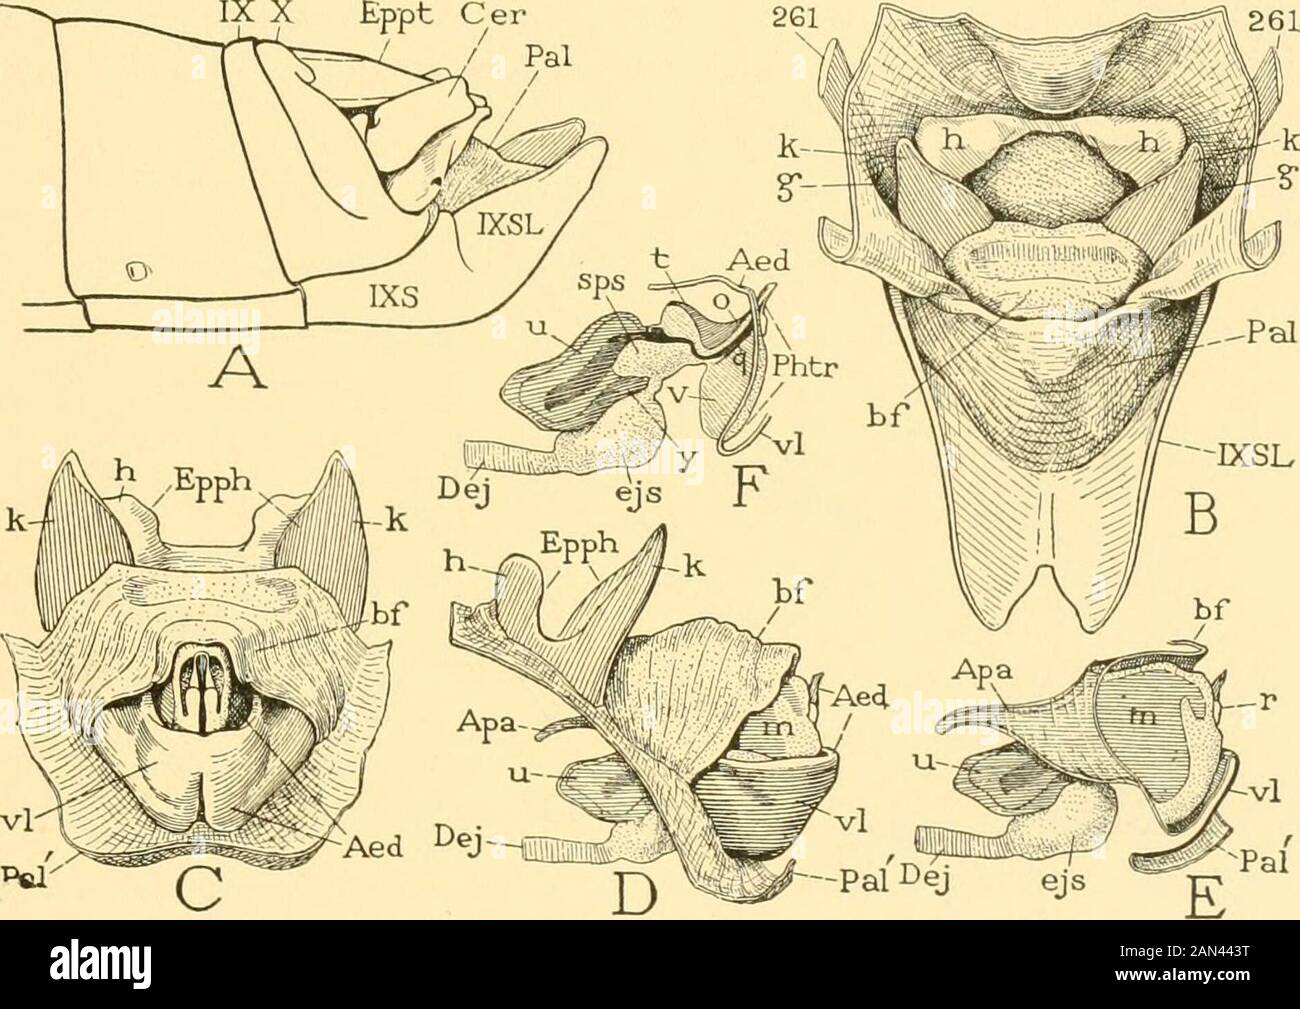 Smithsonian miscellaneous collections . imal part (in) bears a pairof short but very wide lateral apodemes (D, E, Apa). The endophal-lus is relatively small, but the anterior apodemes (iv) of its lateralplates are large and widely divergent (E). Schistocerca amcricana (Drury).—-The elongate subgenital plate ofthe ninth abdominal sternum of this species has a broad, deeply emargi- NO. 6 GRASSHOPPER ABDOMEN SNODGRASS iiate extension projecting far beyond the origin of the palhum from itsdorsal lamella (fig. 35 A, B, IXSL). The exposed part of the pallium(Pal) forms a thick, transversely corrugat Stock Photo